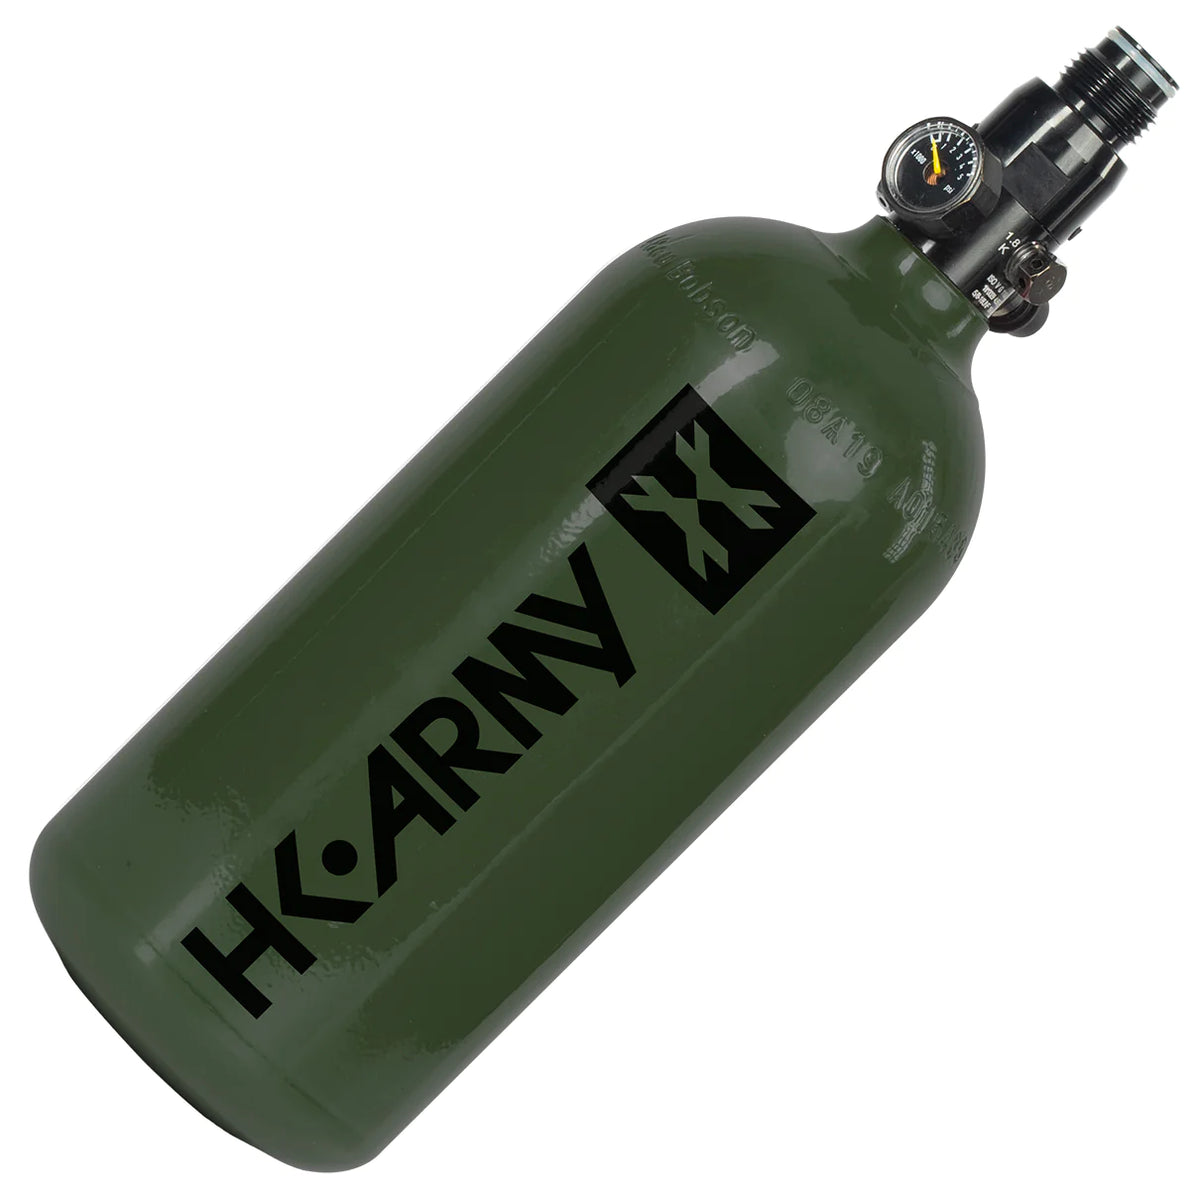 48ci / 3000psi -  Paintball Compressed Air Tank - Olive | HK Army